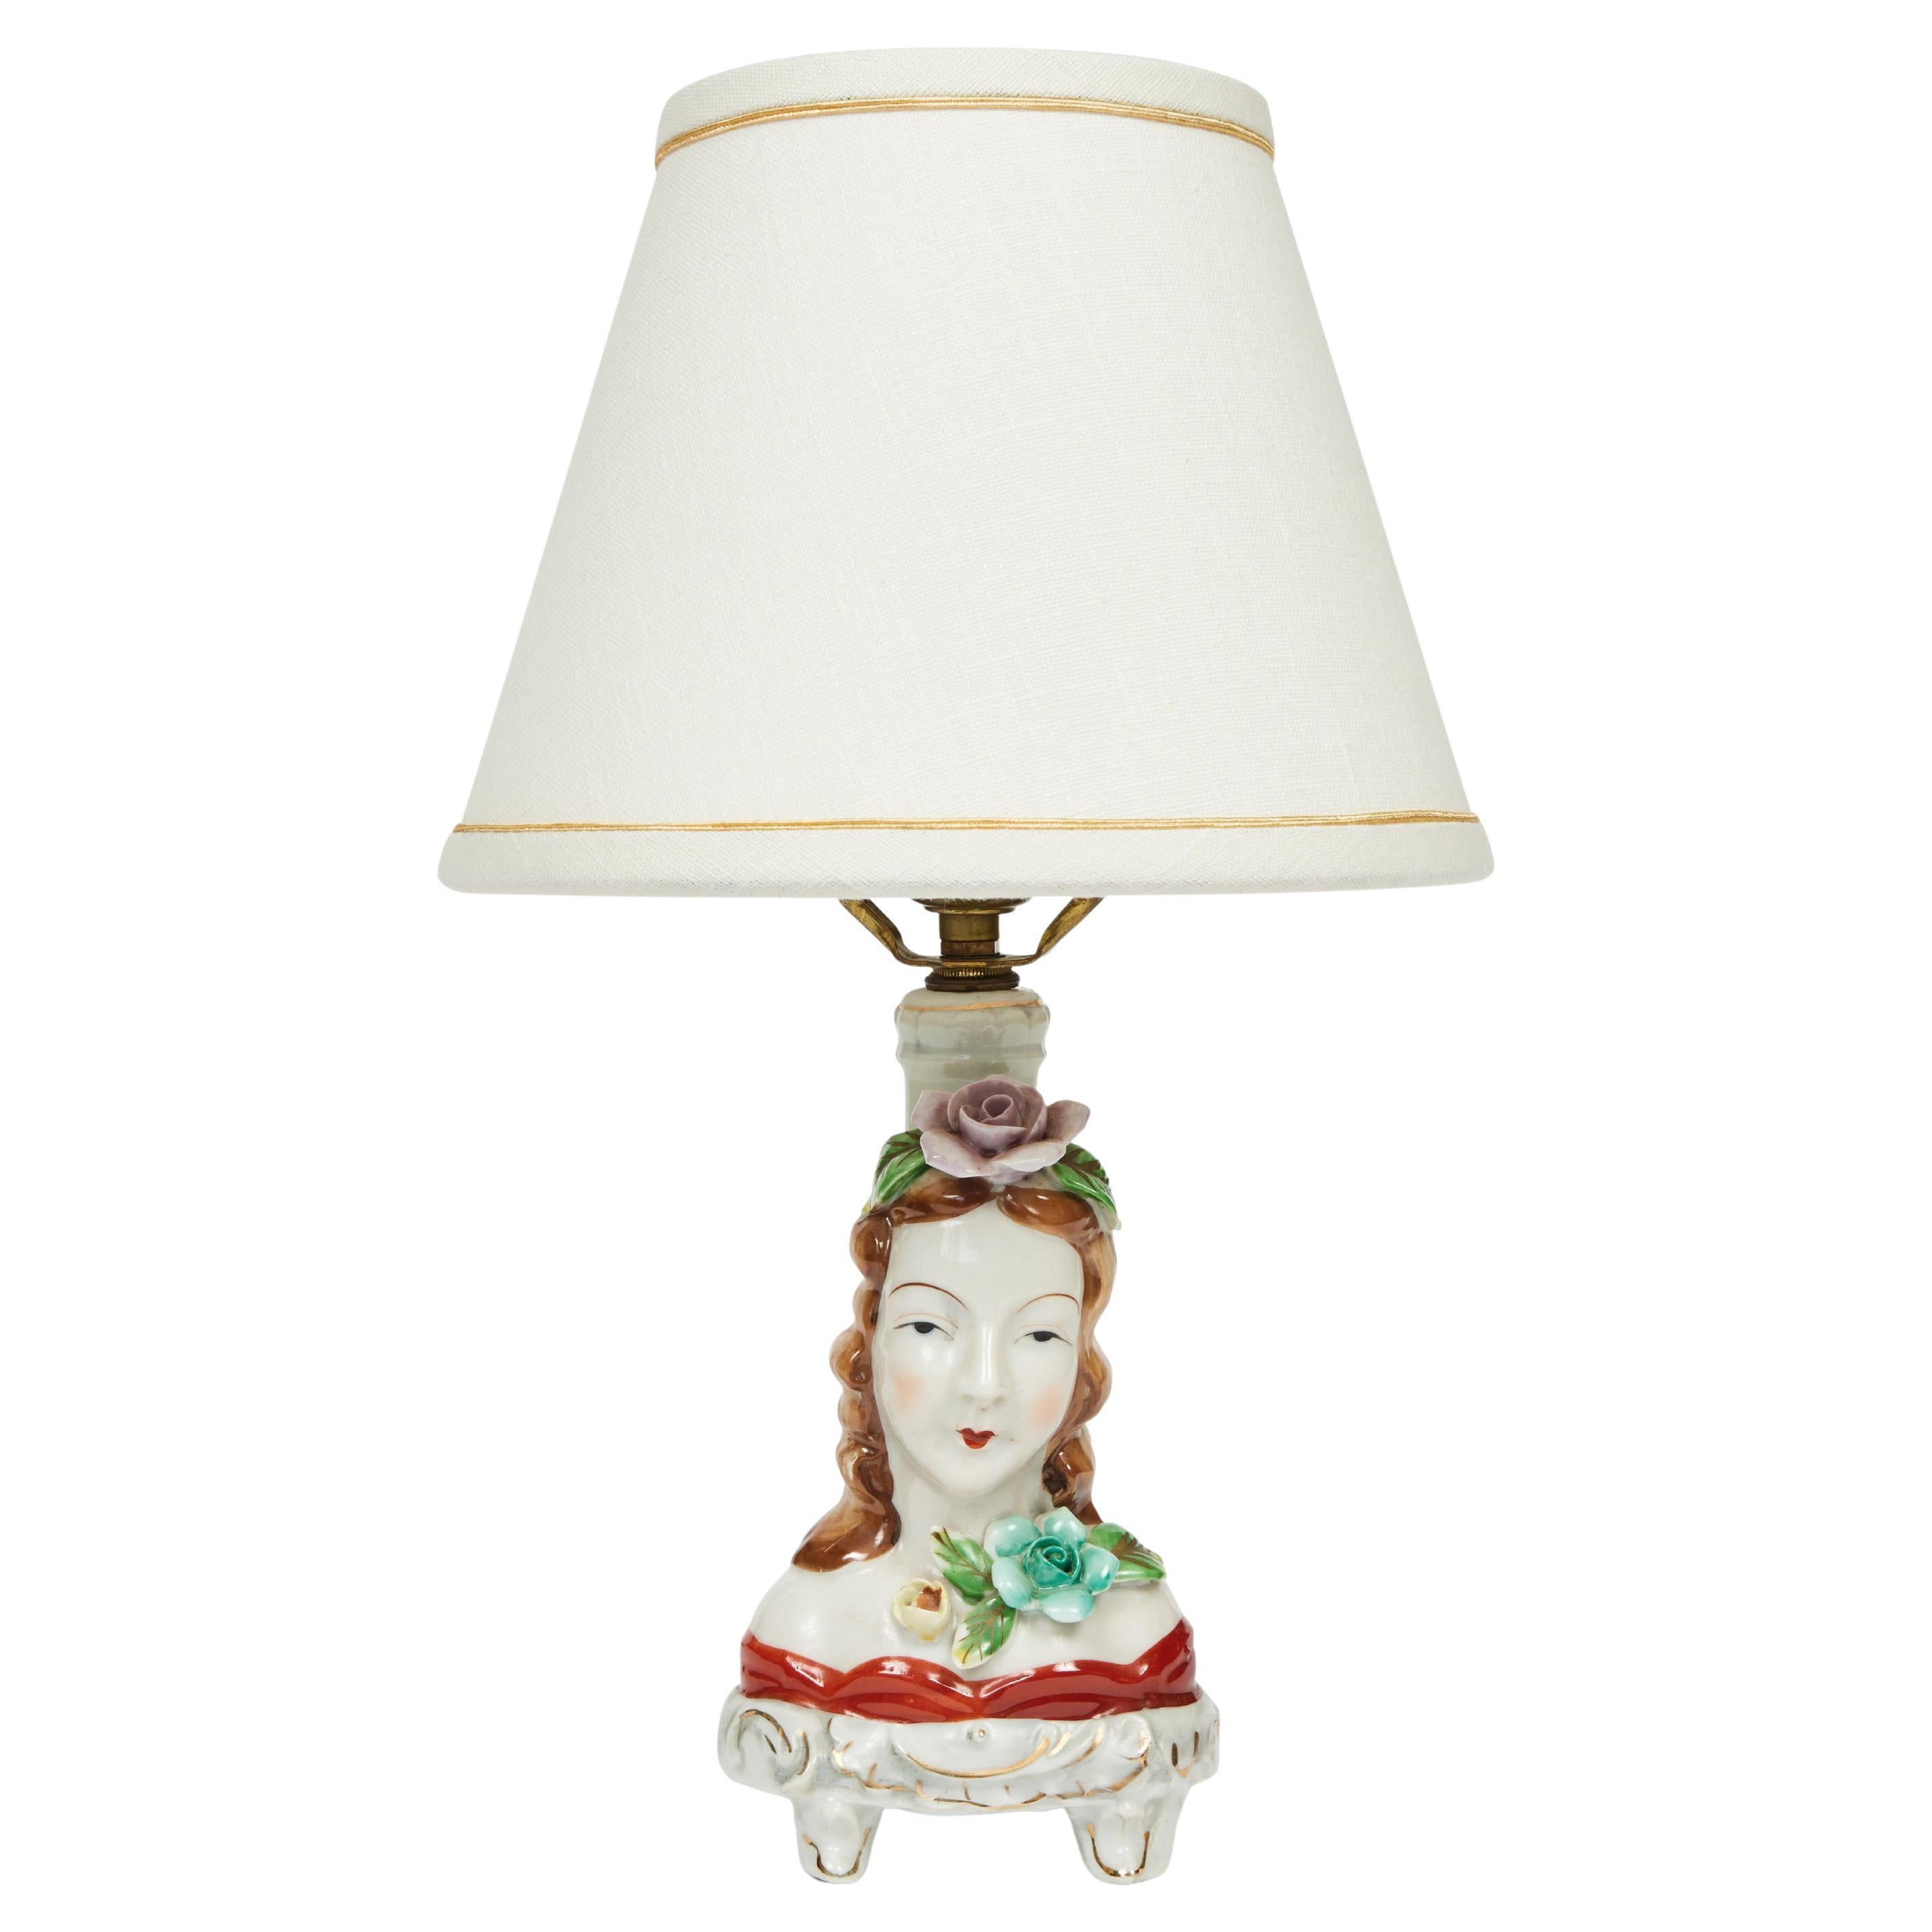 Vintage Japanese Hand Painted Porcelain Bust of a Woman Lamp